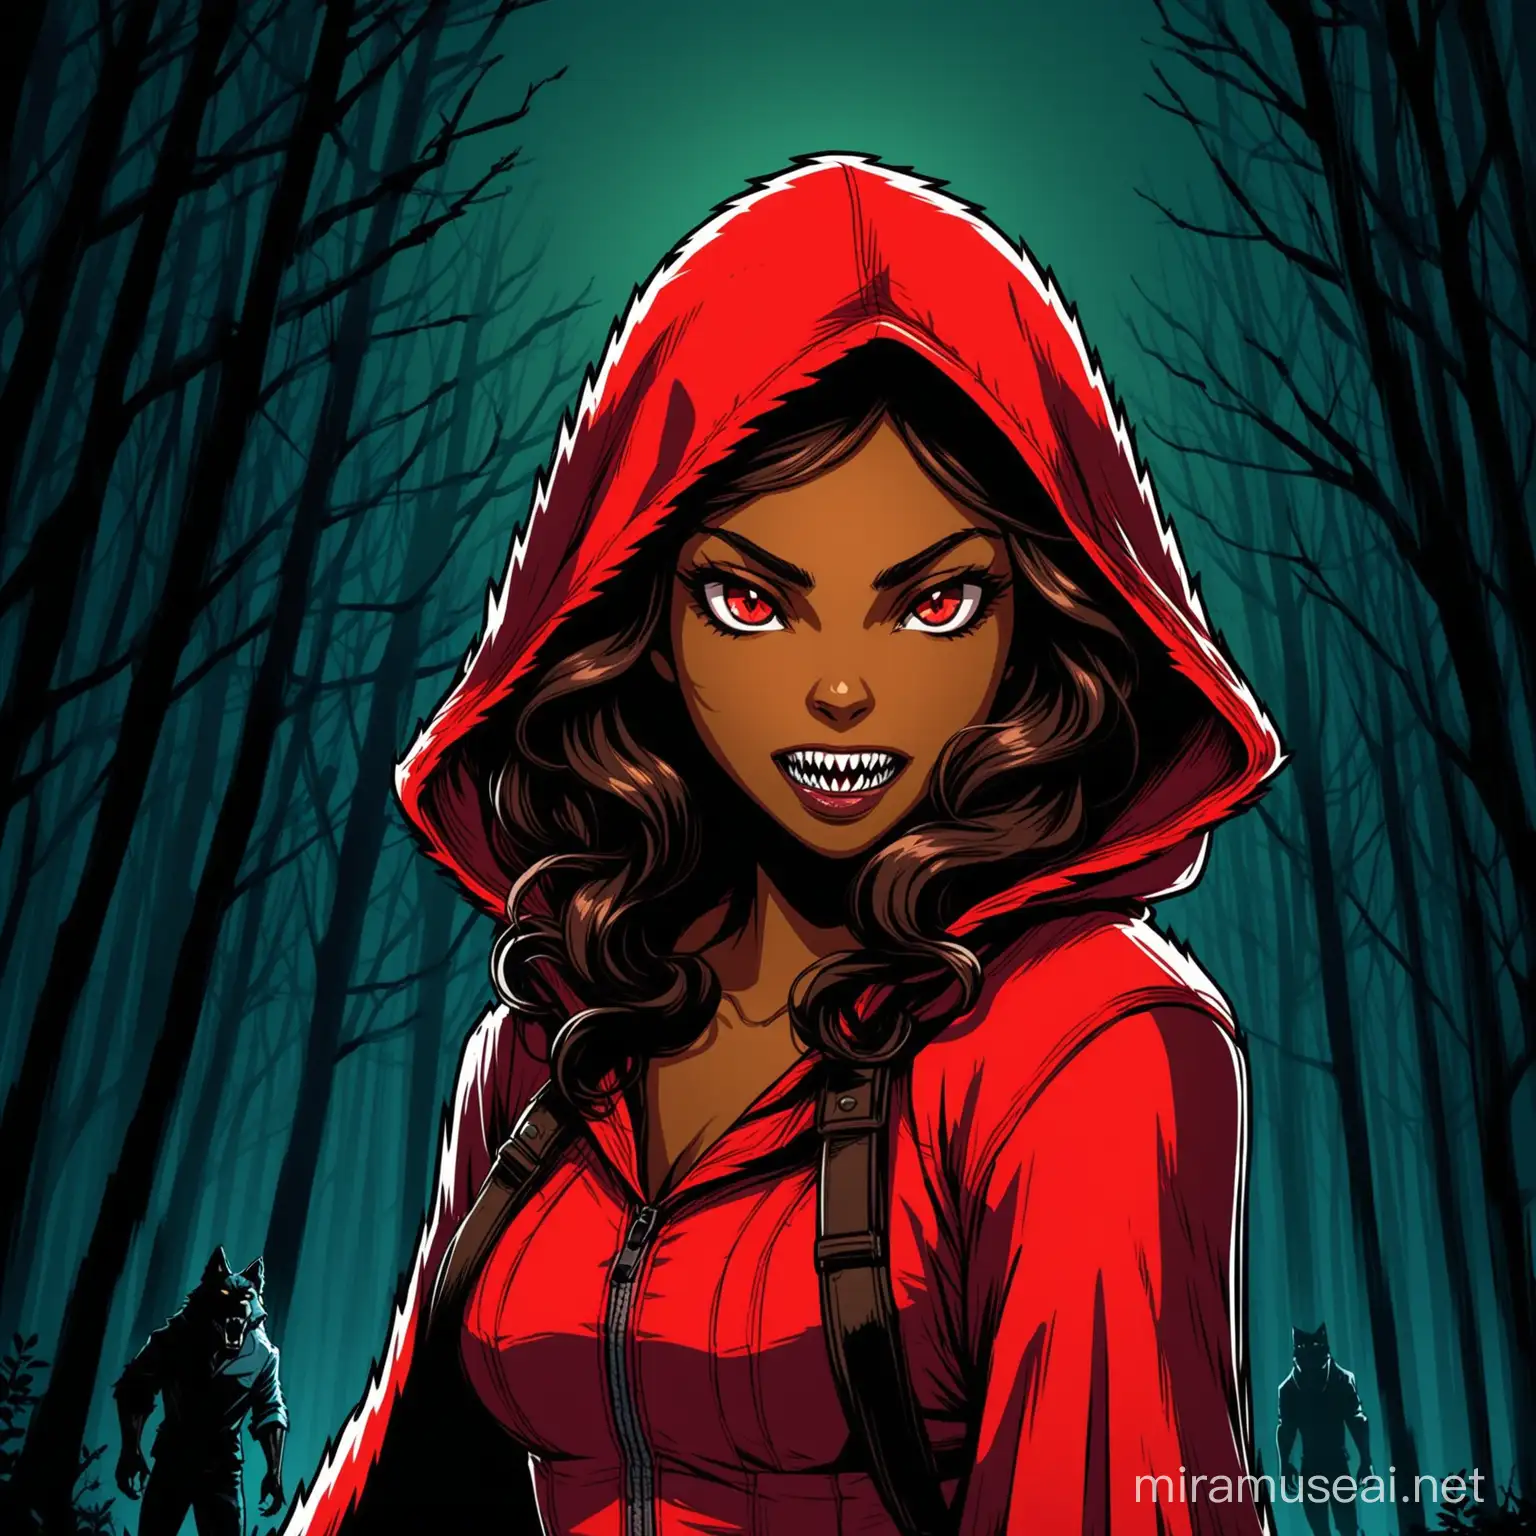 video game promo poster of BLACK GIRL werewolf hybrid CHARACTER, long curly brown hair, sharp wolf teeth, wearing red riding hood inspired outfit, IN THE STYLE OF THE WOLF AMONG US, TELLTALE GAMES, cell shading, neo-noir

